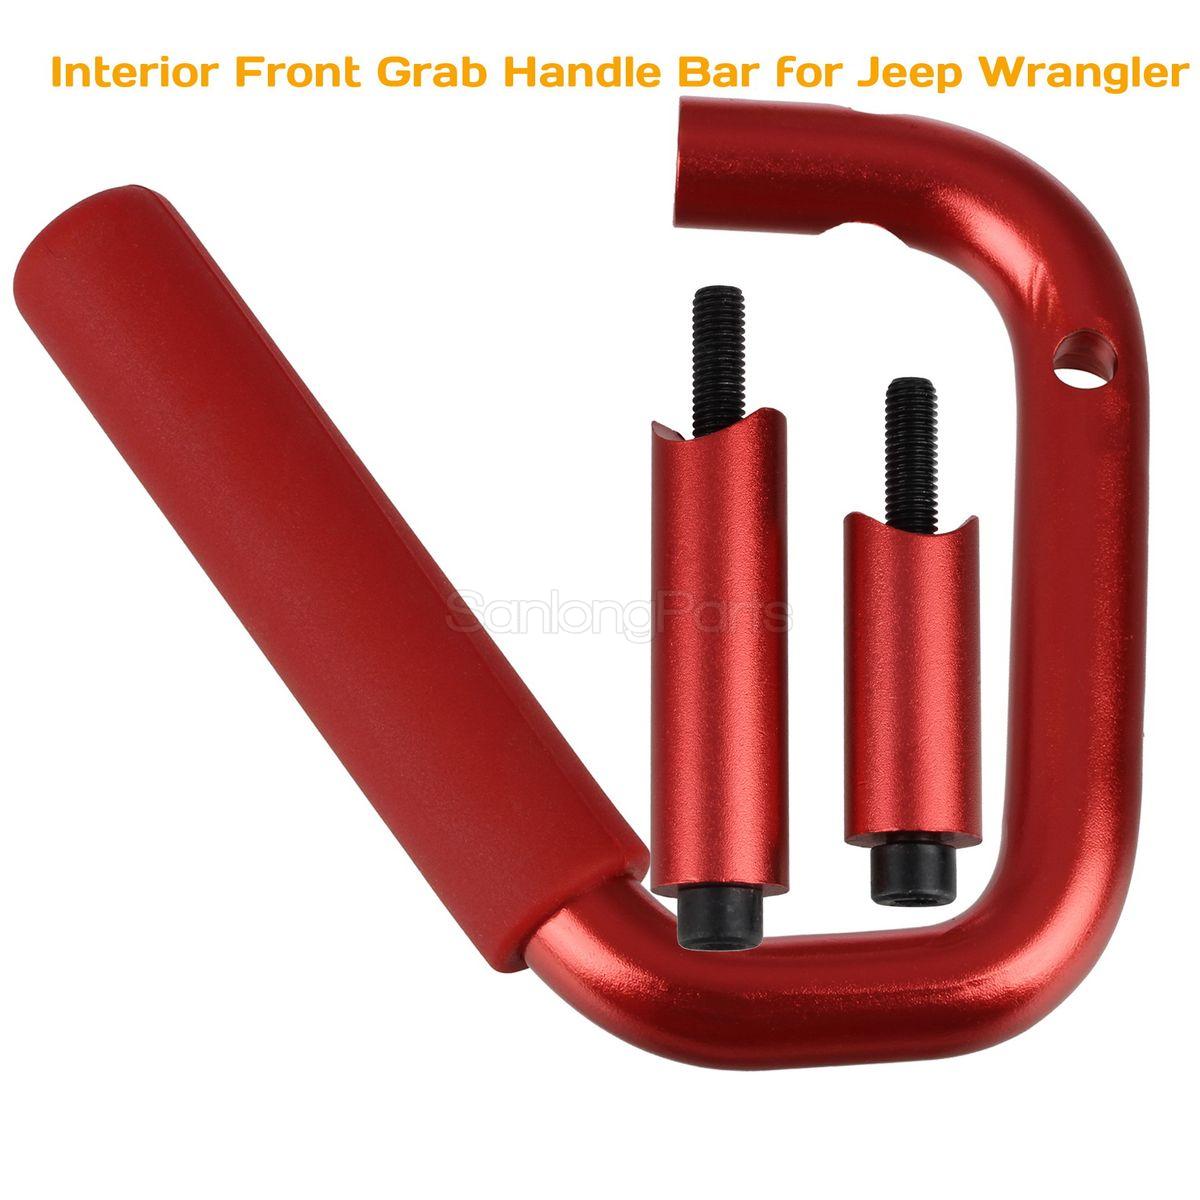 2x Red Solid Steel Front Grab Handle For Jeep Wrangler 2007-2017